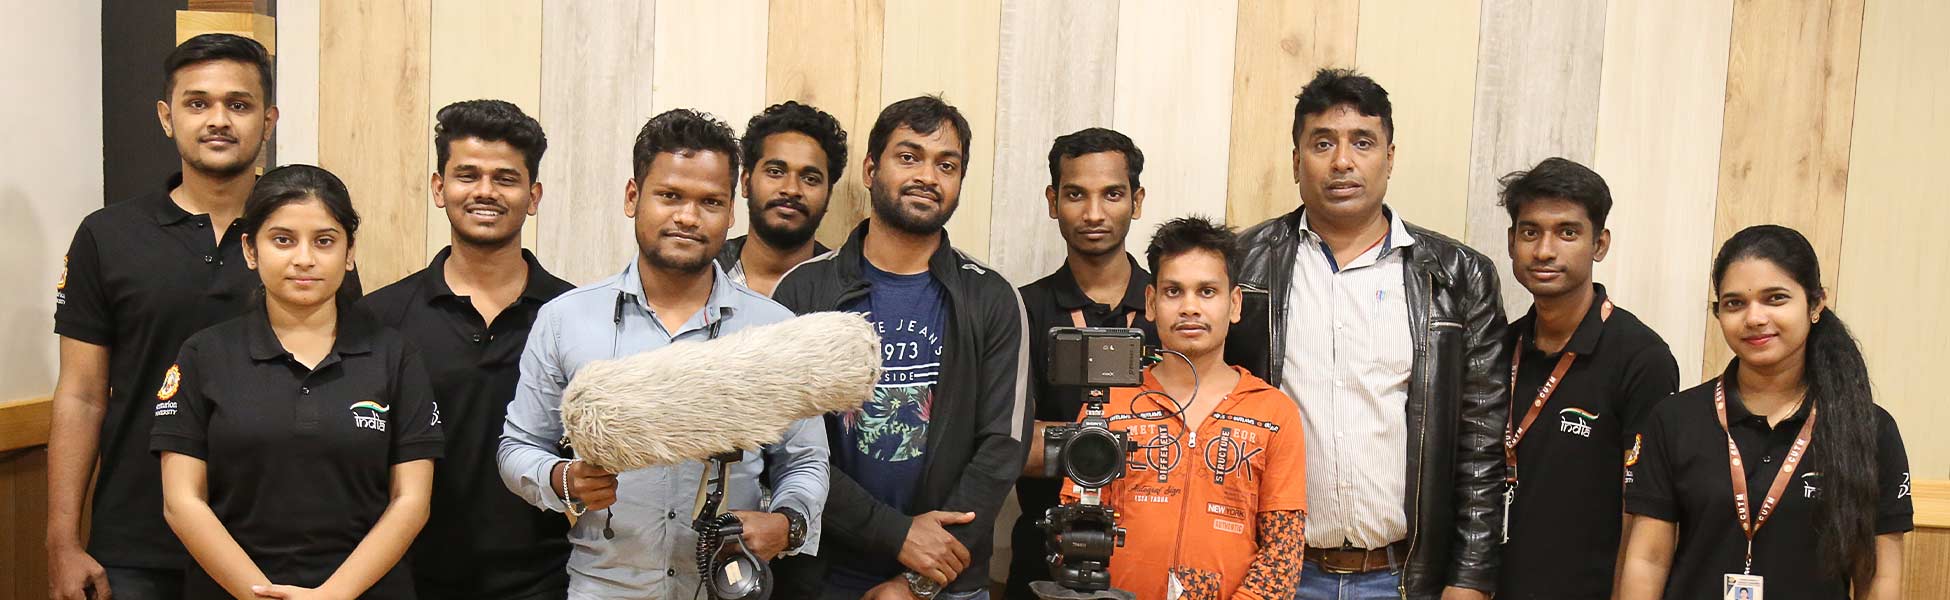 educational film consultancy services in india, educational video consultancy services in india, educational tv consultancy services in india, educational consultancy services in india